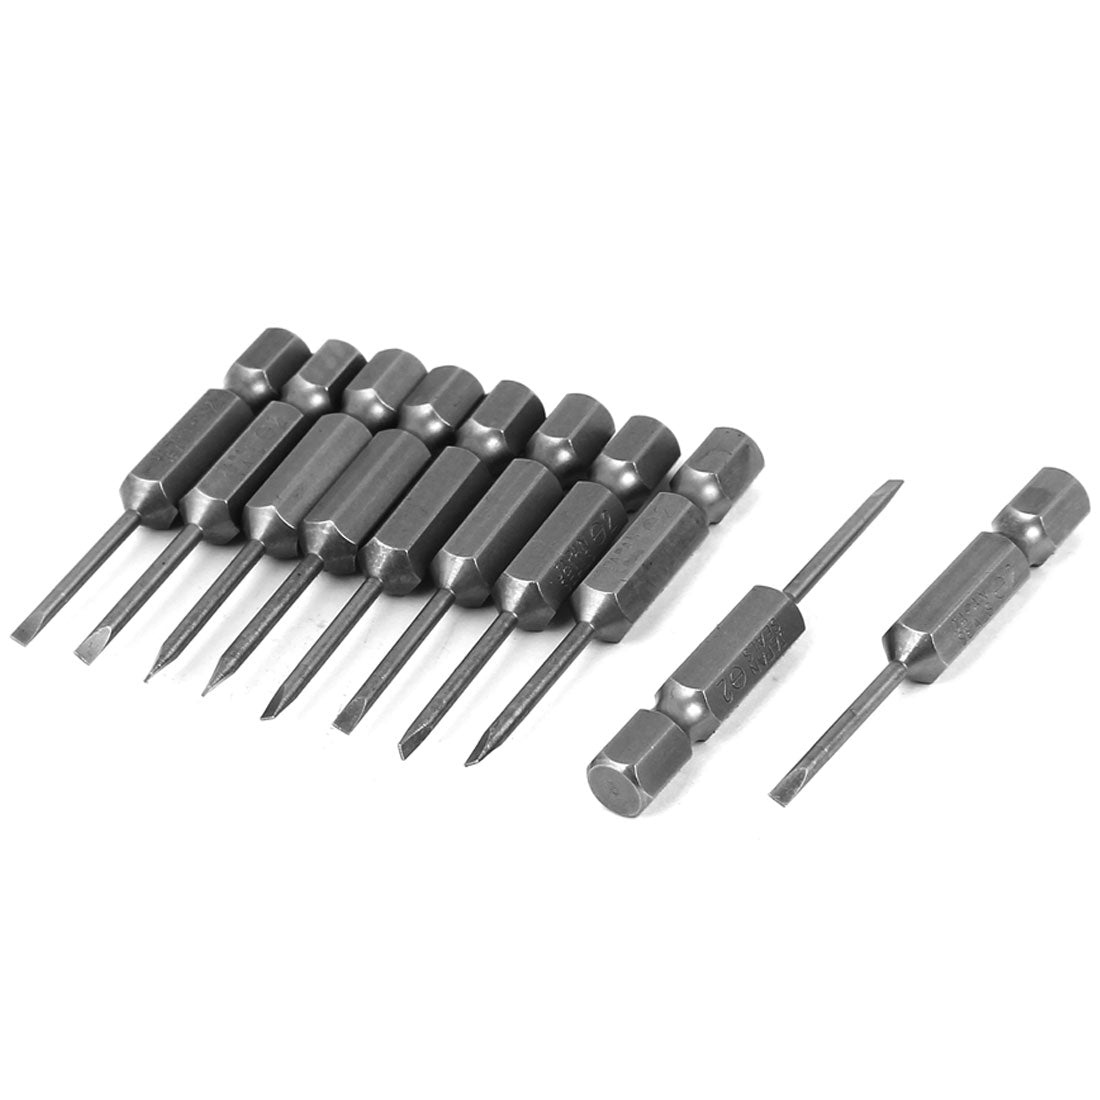 Uxcell Uxcell 2.5mm Tip Magnetic Slotted Flat Head Screw Driver Bits 10 Pcs